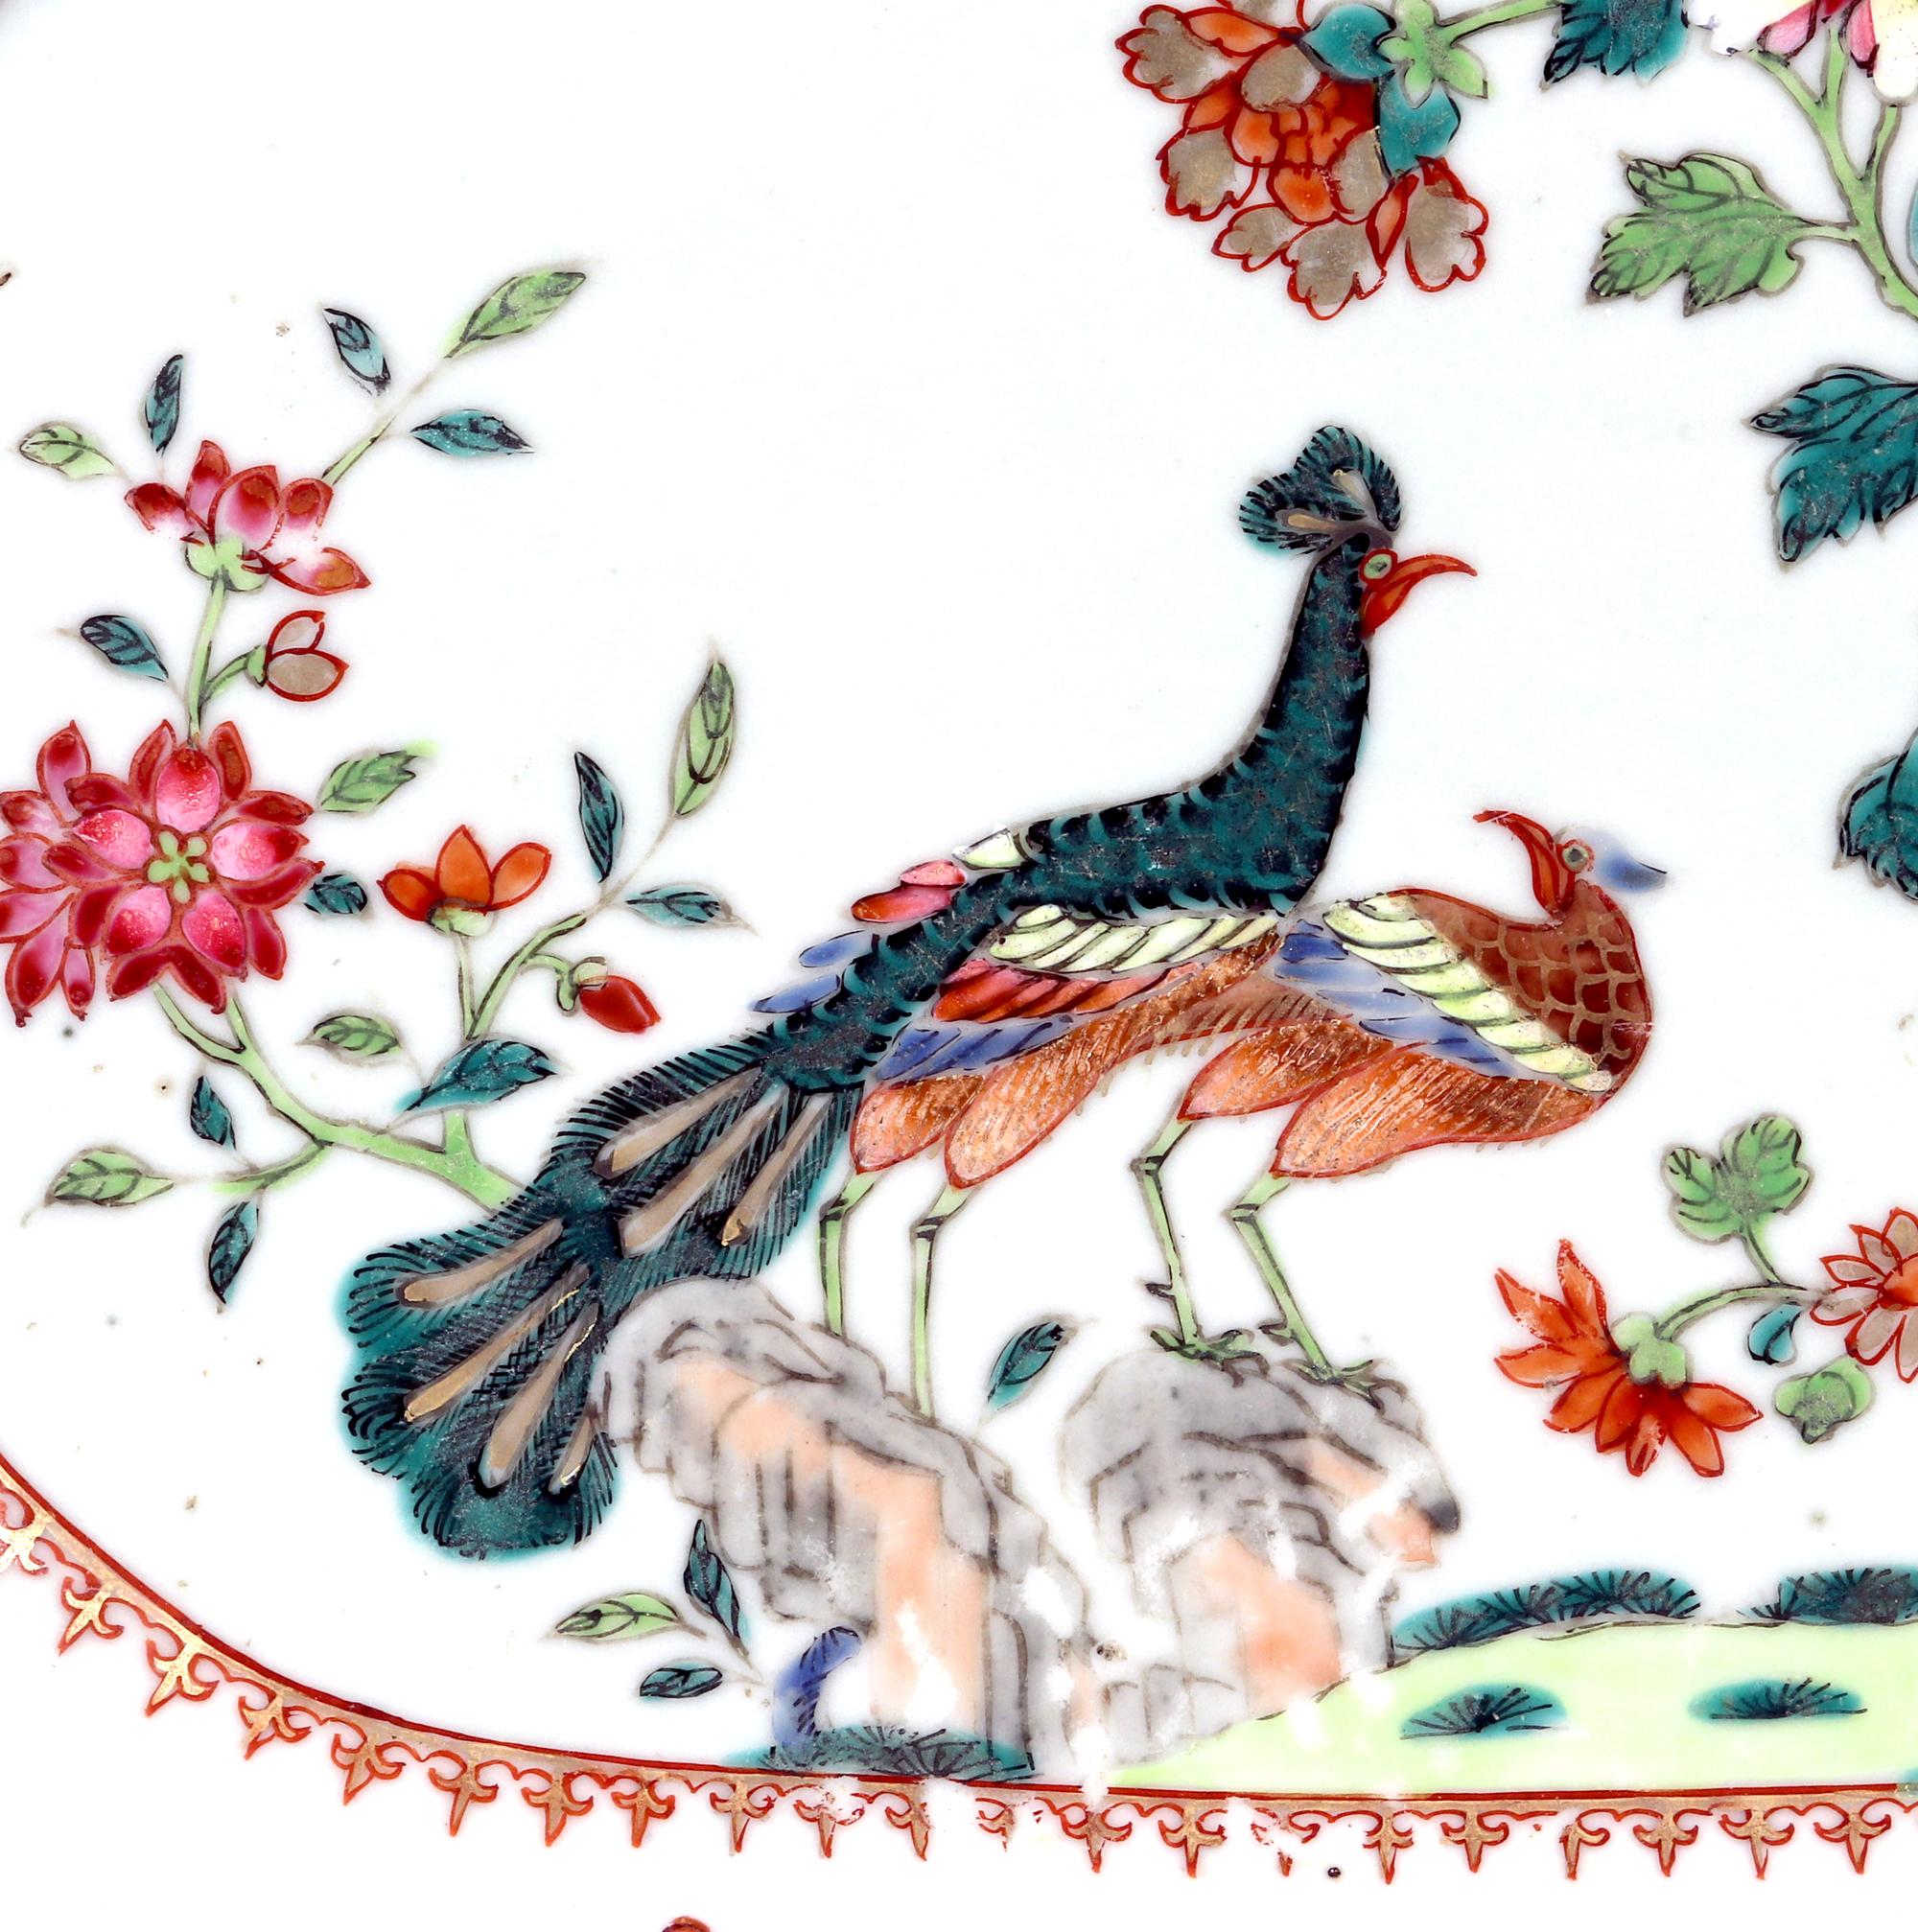 Chinese Export porcelain double peacock dish,
Circa 1765

The Chinese Export porcelain famille rose rectangular dish with canted corners is painted with the famous 